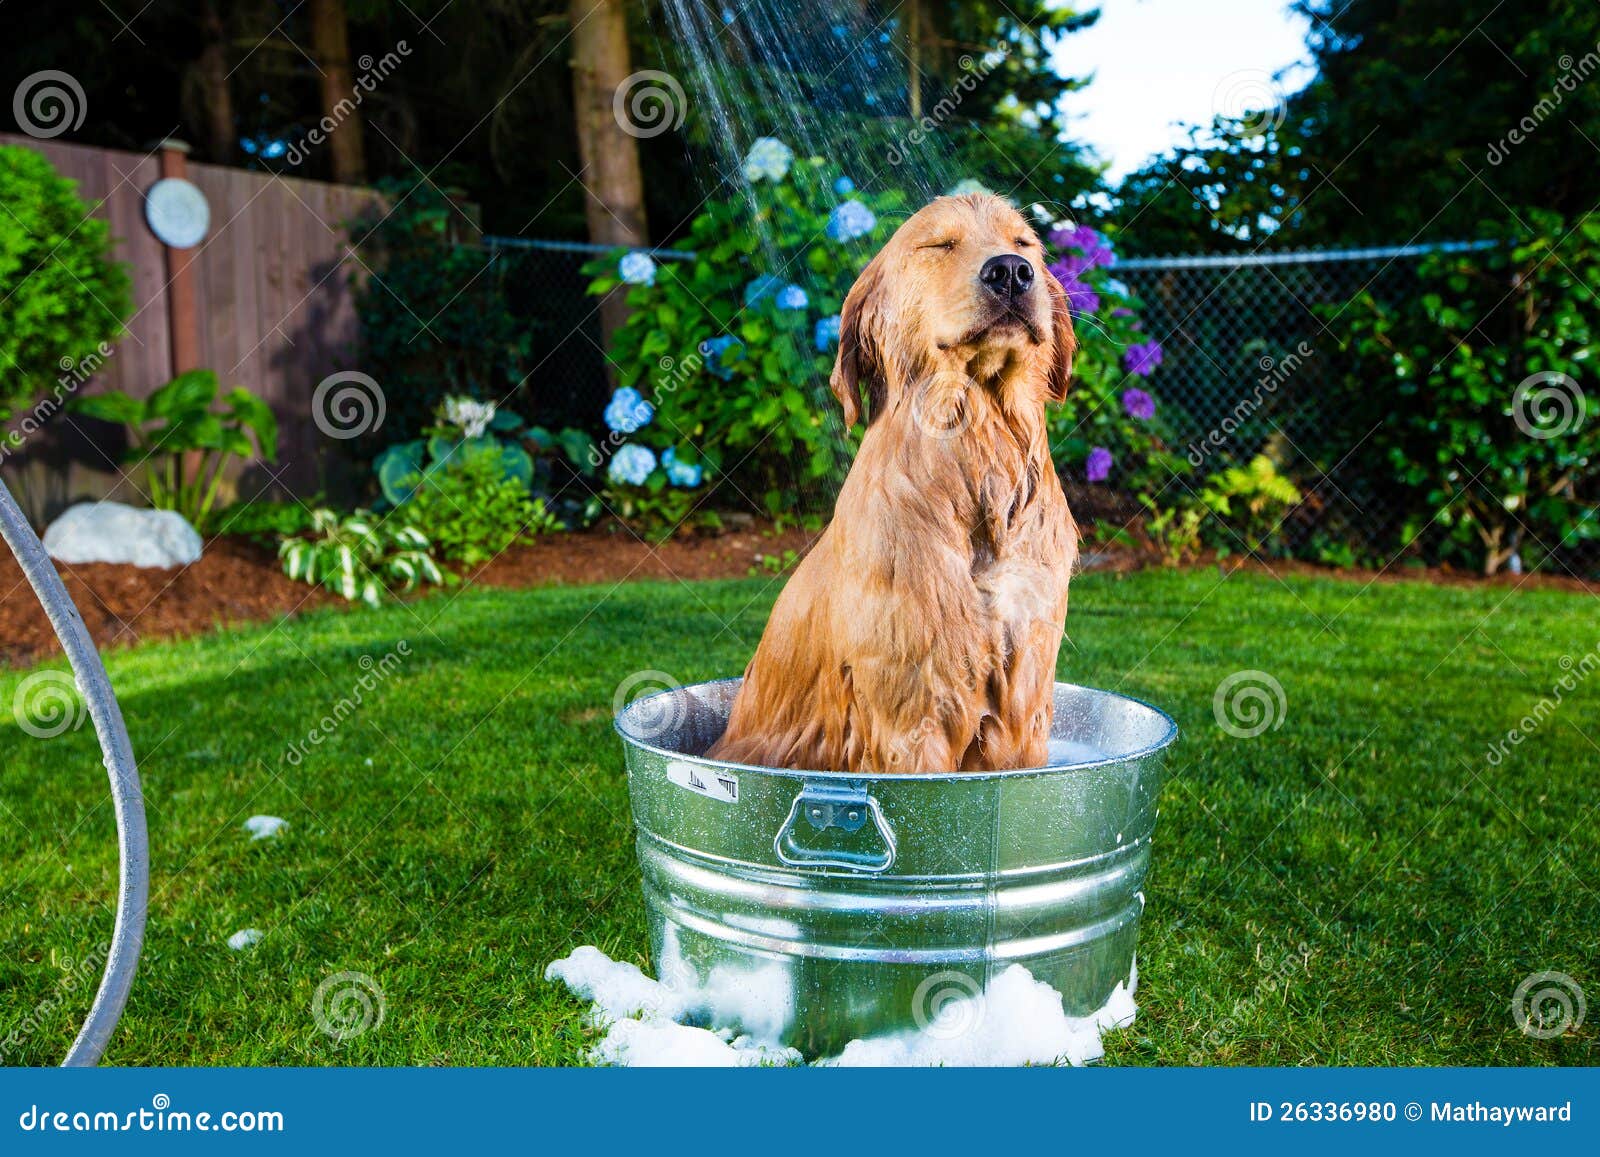 Dog shower stock photo. Image of bubbles, funny, house - 26336980